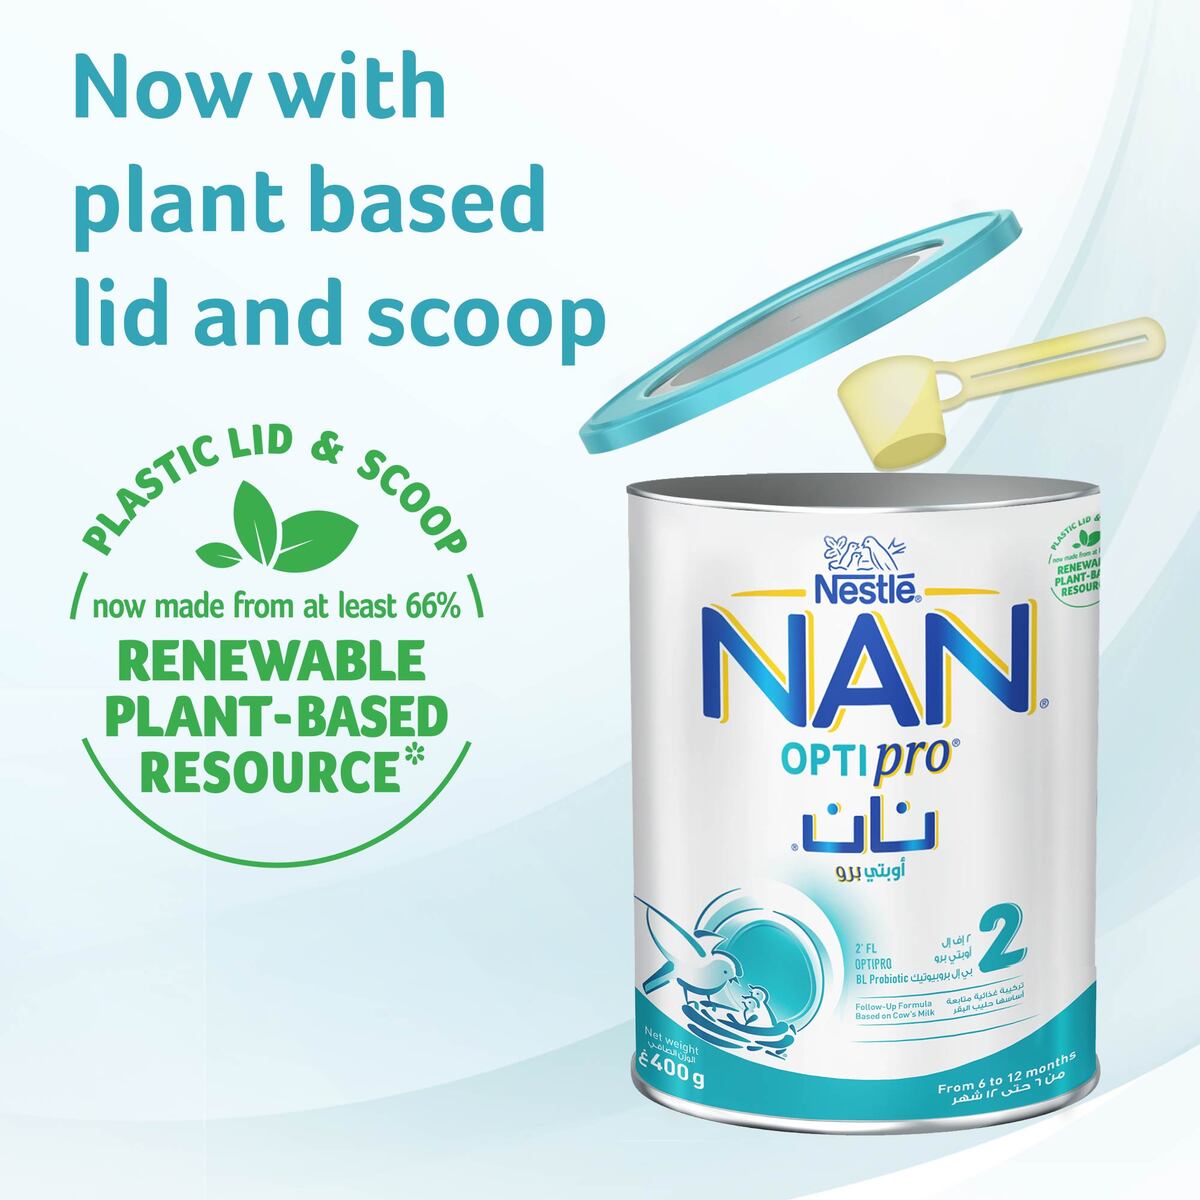 Nestle NAN Optipro Stage 2 Follow Up Formula From 6 to 12 Months 400g